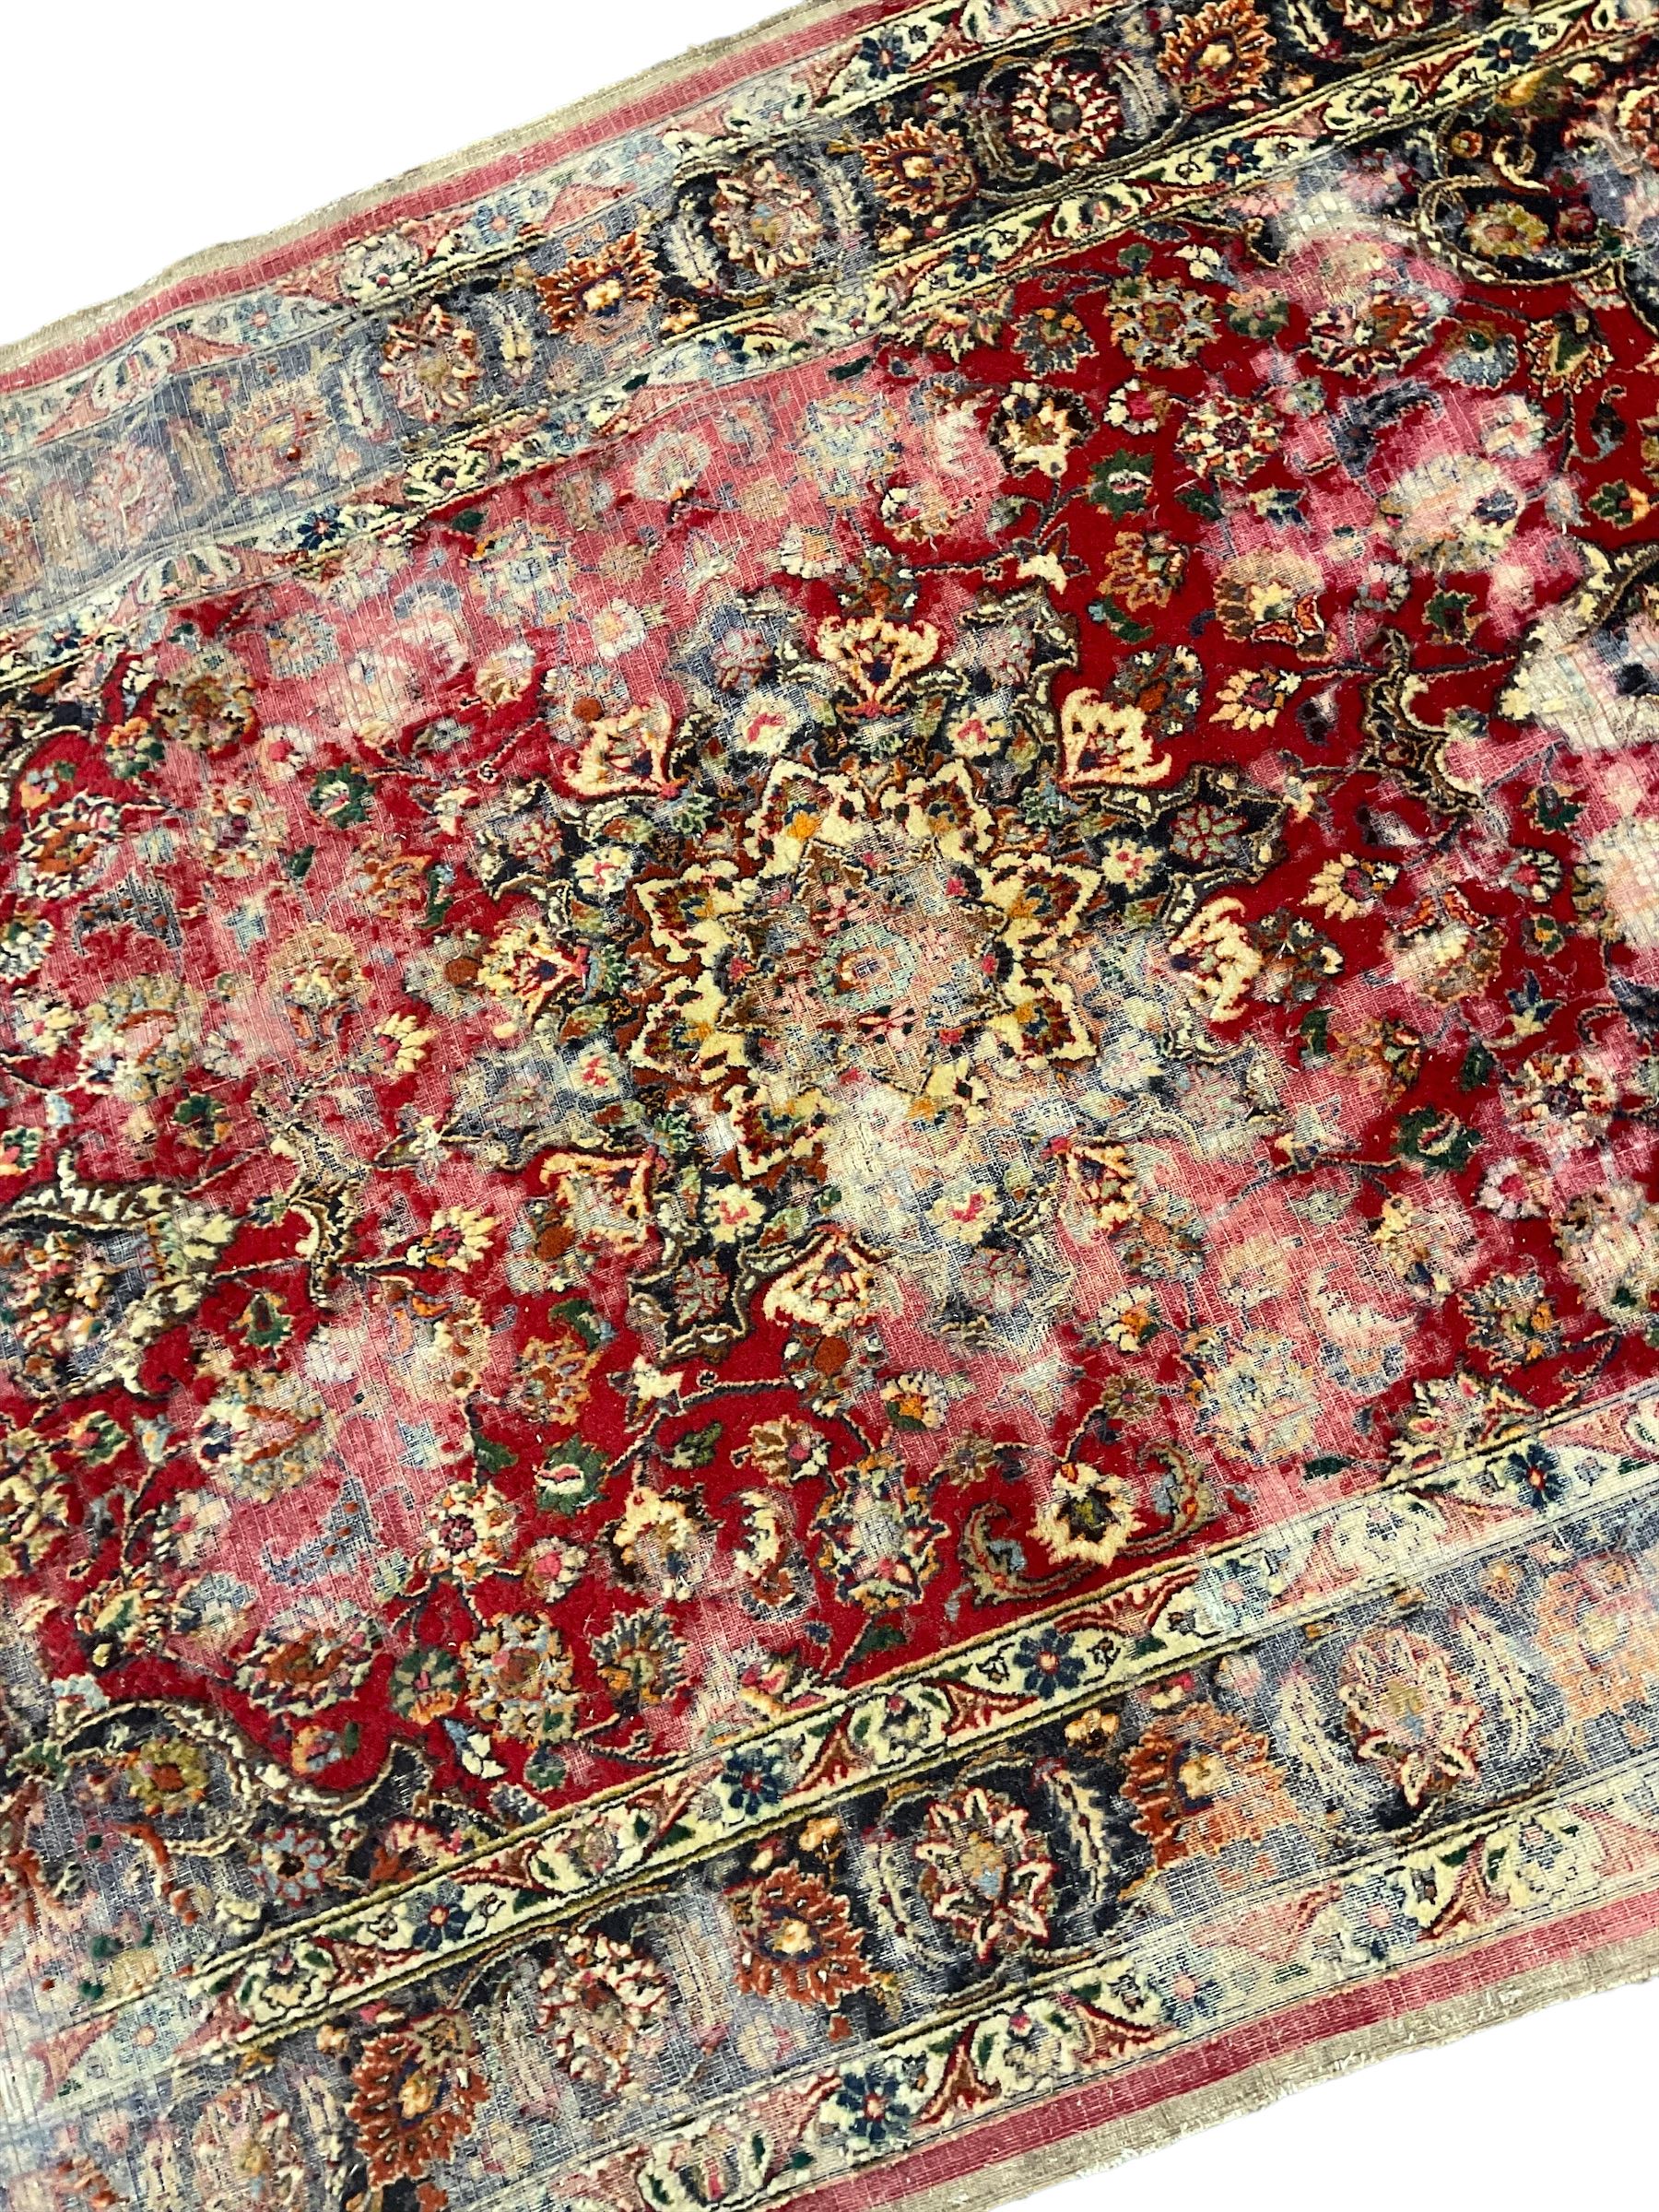 Antique Persian red ground rug - Image 2 of 4